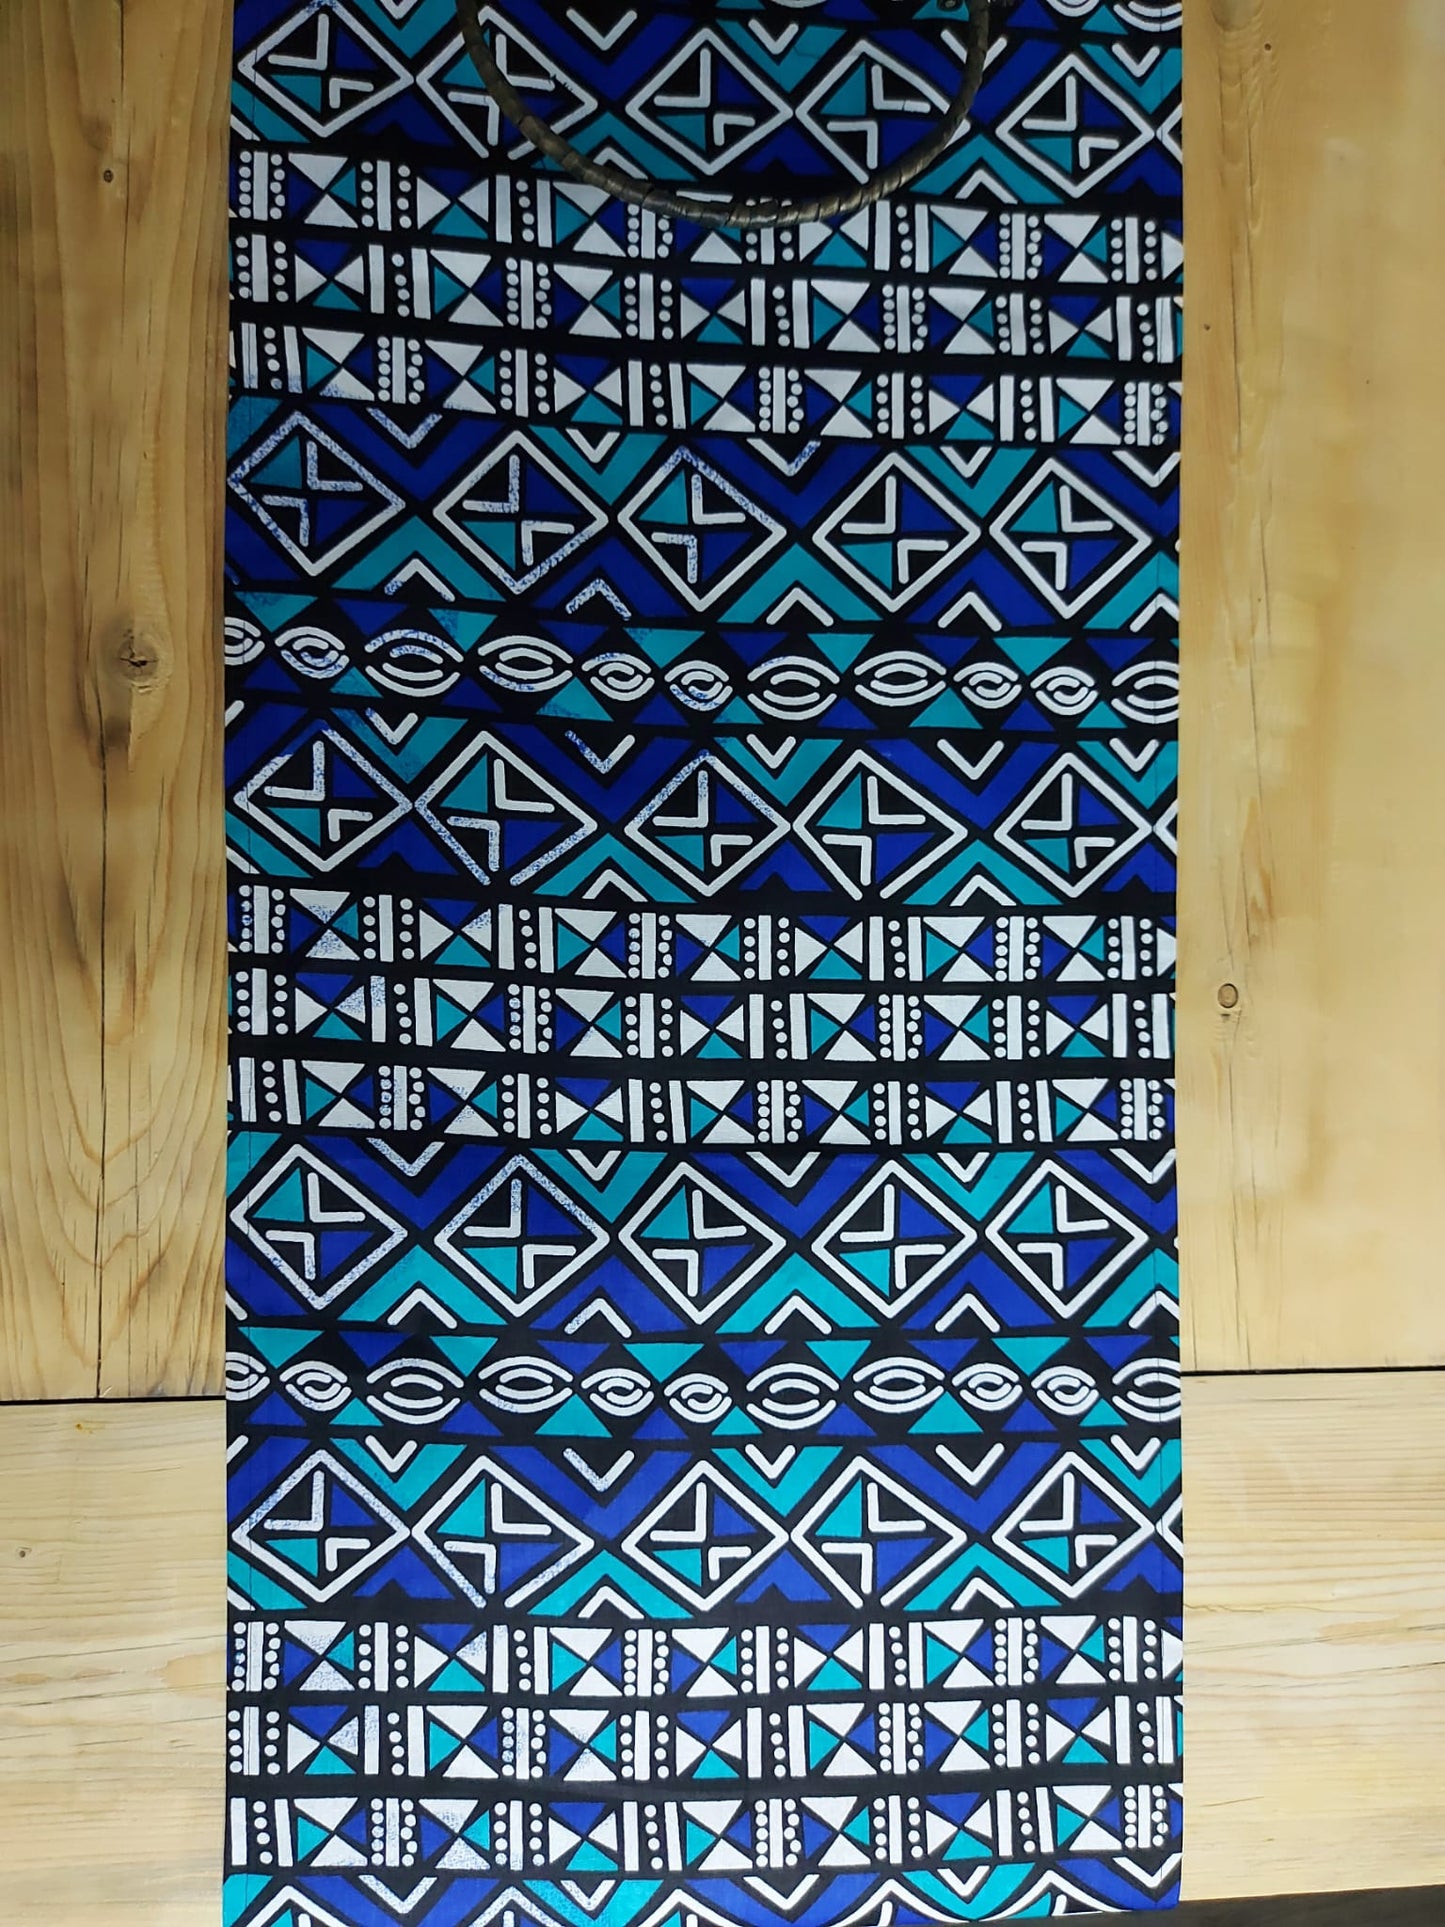 Handmade Table Runner 160x35cm | 180x35 | 200x35cm | African Print "Mudcloth" Bogolan Inspired Print  Made from 100% African Print Fabric